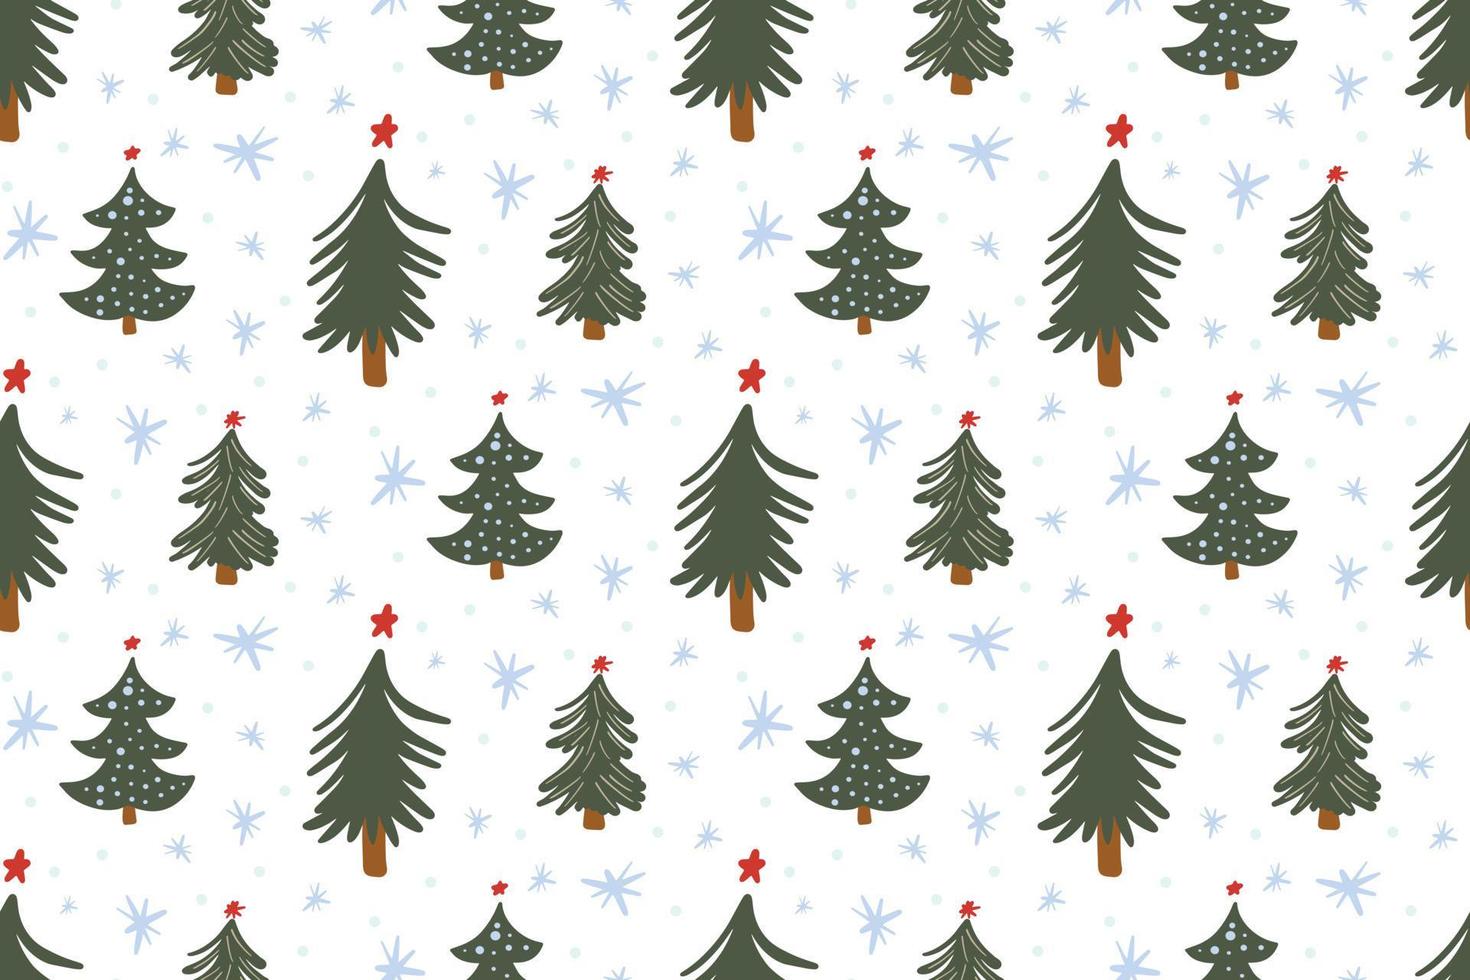 Cute winter seamless pattern background with Christmas tree simple doodles and snowflakes in childish hand drawn style. Seasonal New Year holiday festive backdrop texture, print vector